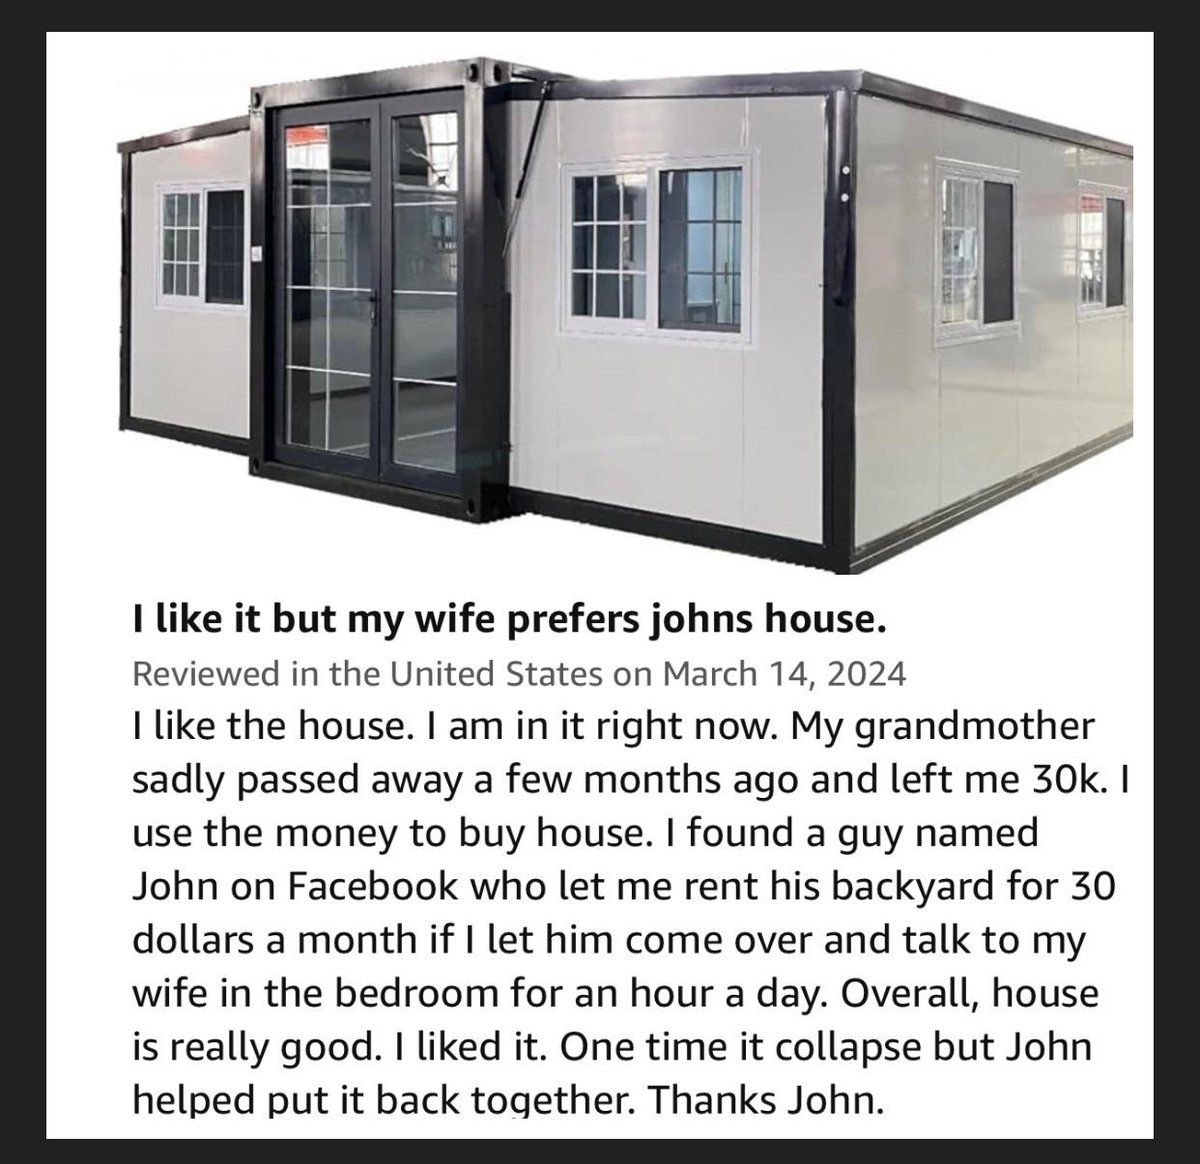 The single review on this house you can buy from Amazon